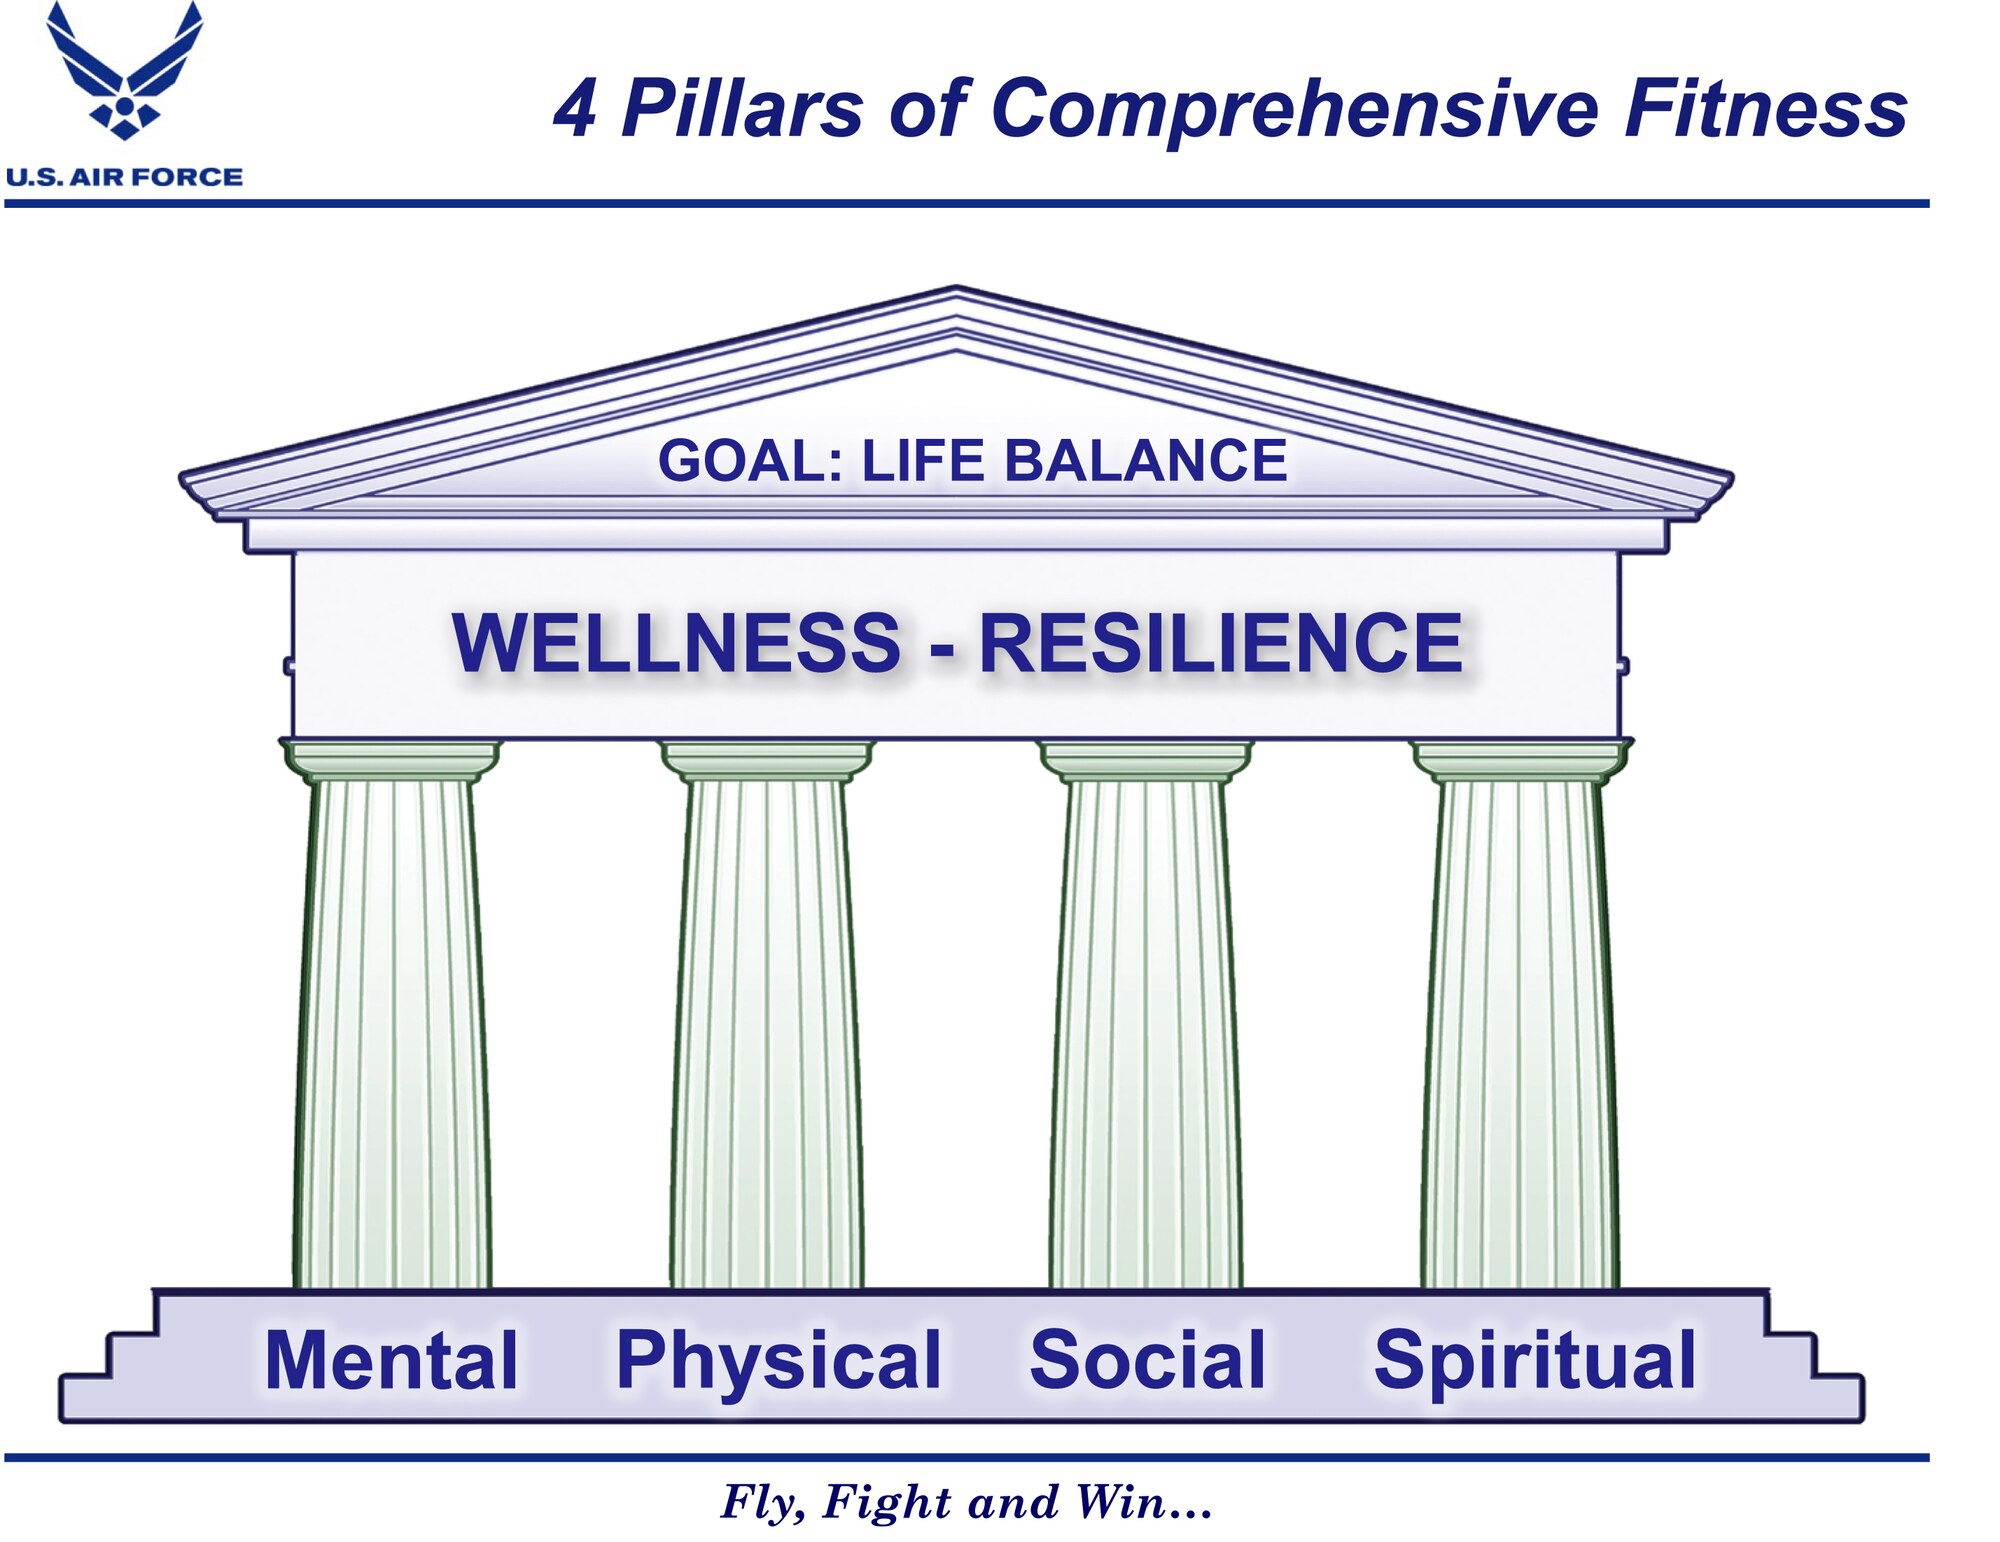 The 4 Pillars of Comprehensive Fitness; mental, physical, social and spiritual are an important aspect of the Wingman concept. "It's important to make sure each of those pillars are strong because when even one is weak, it puts more of a load on the other pillars. Therefore, weakens the comprehensive wingman structure," said Maj. Matthew Simpson, 920th Rescue Wing chaplain.  (Courtesy Graphic)